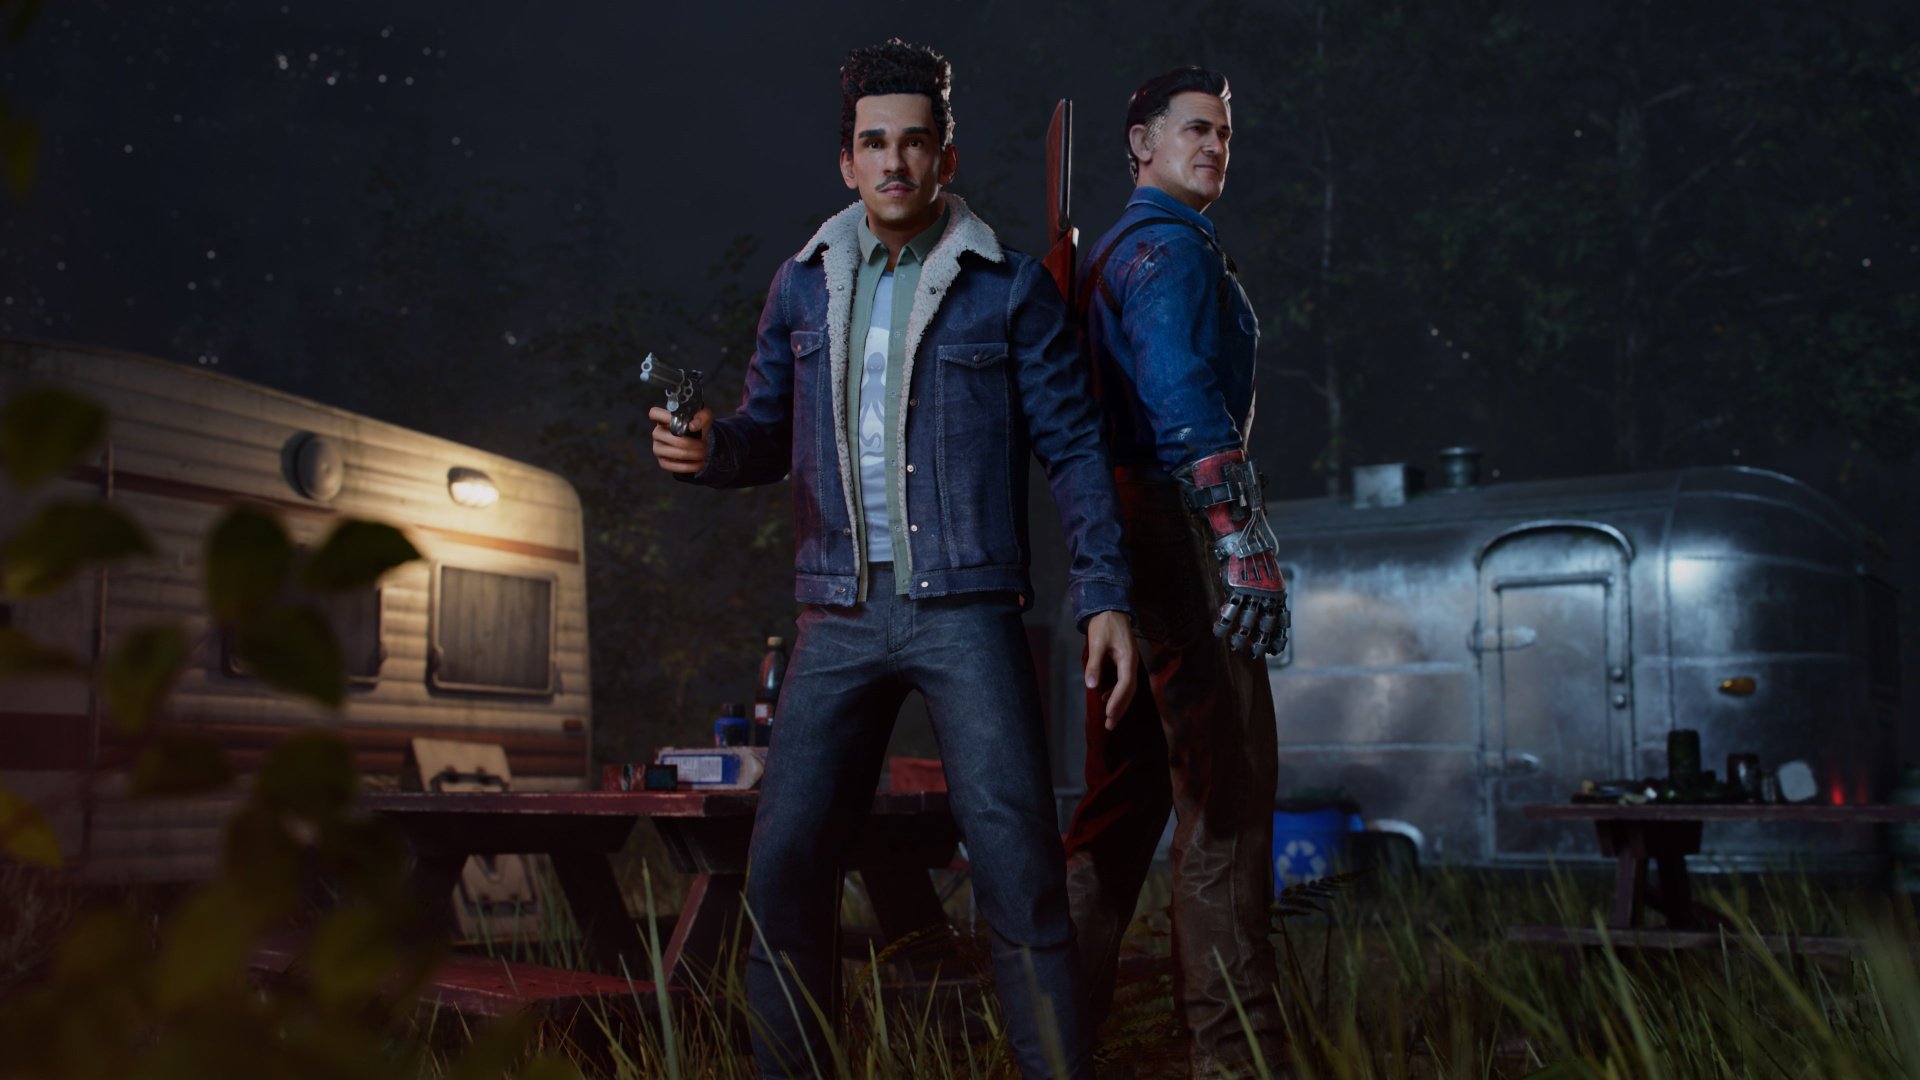 Evil Dead: The Game gets new free and paid DLC in its latest